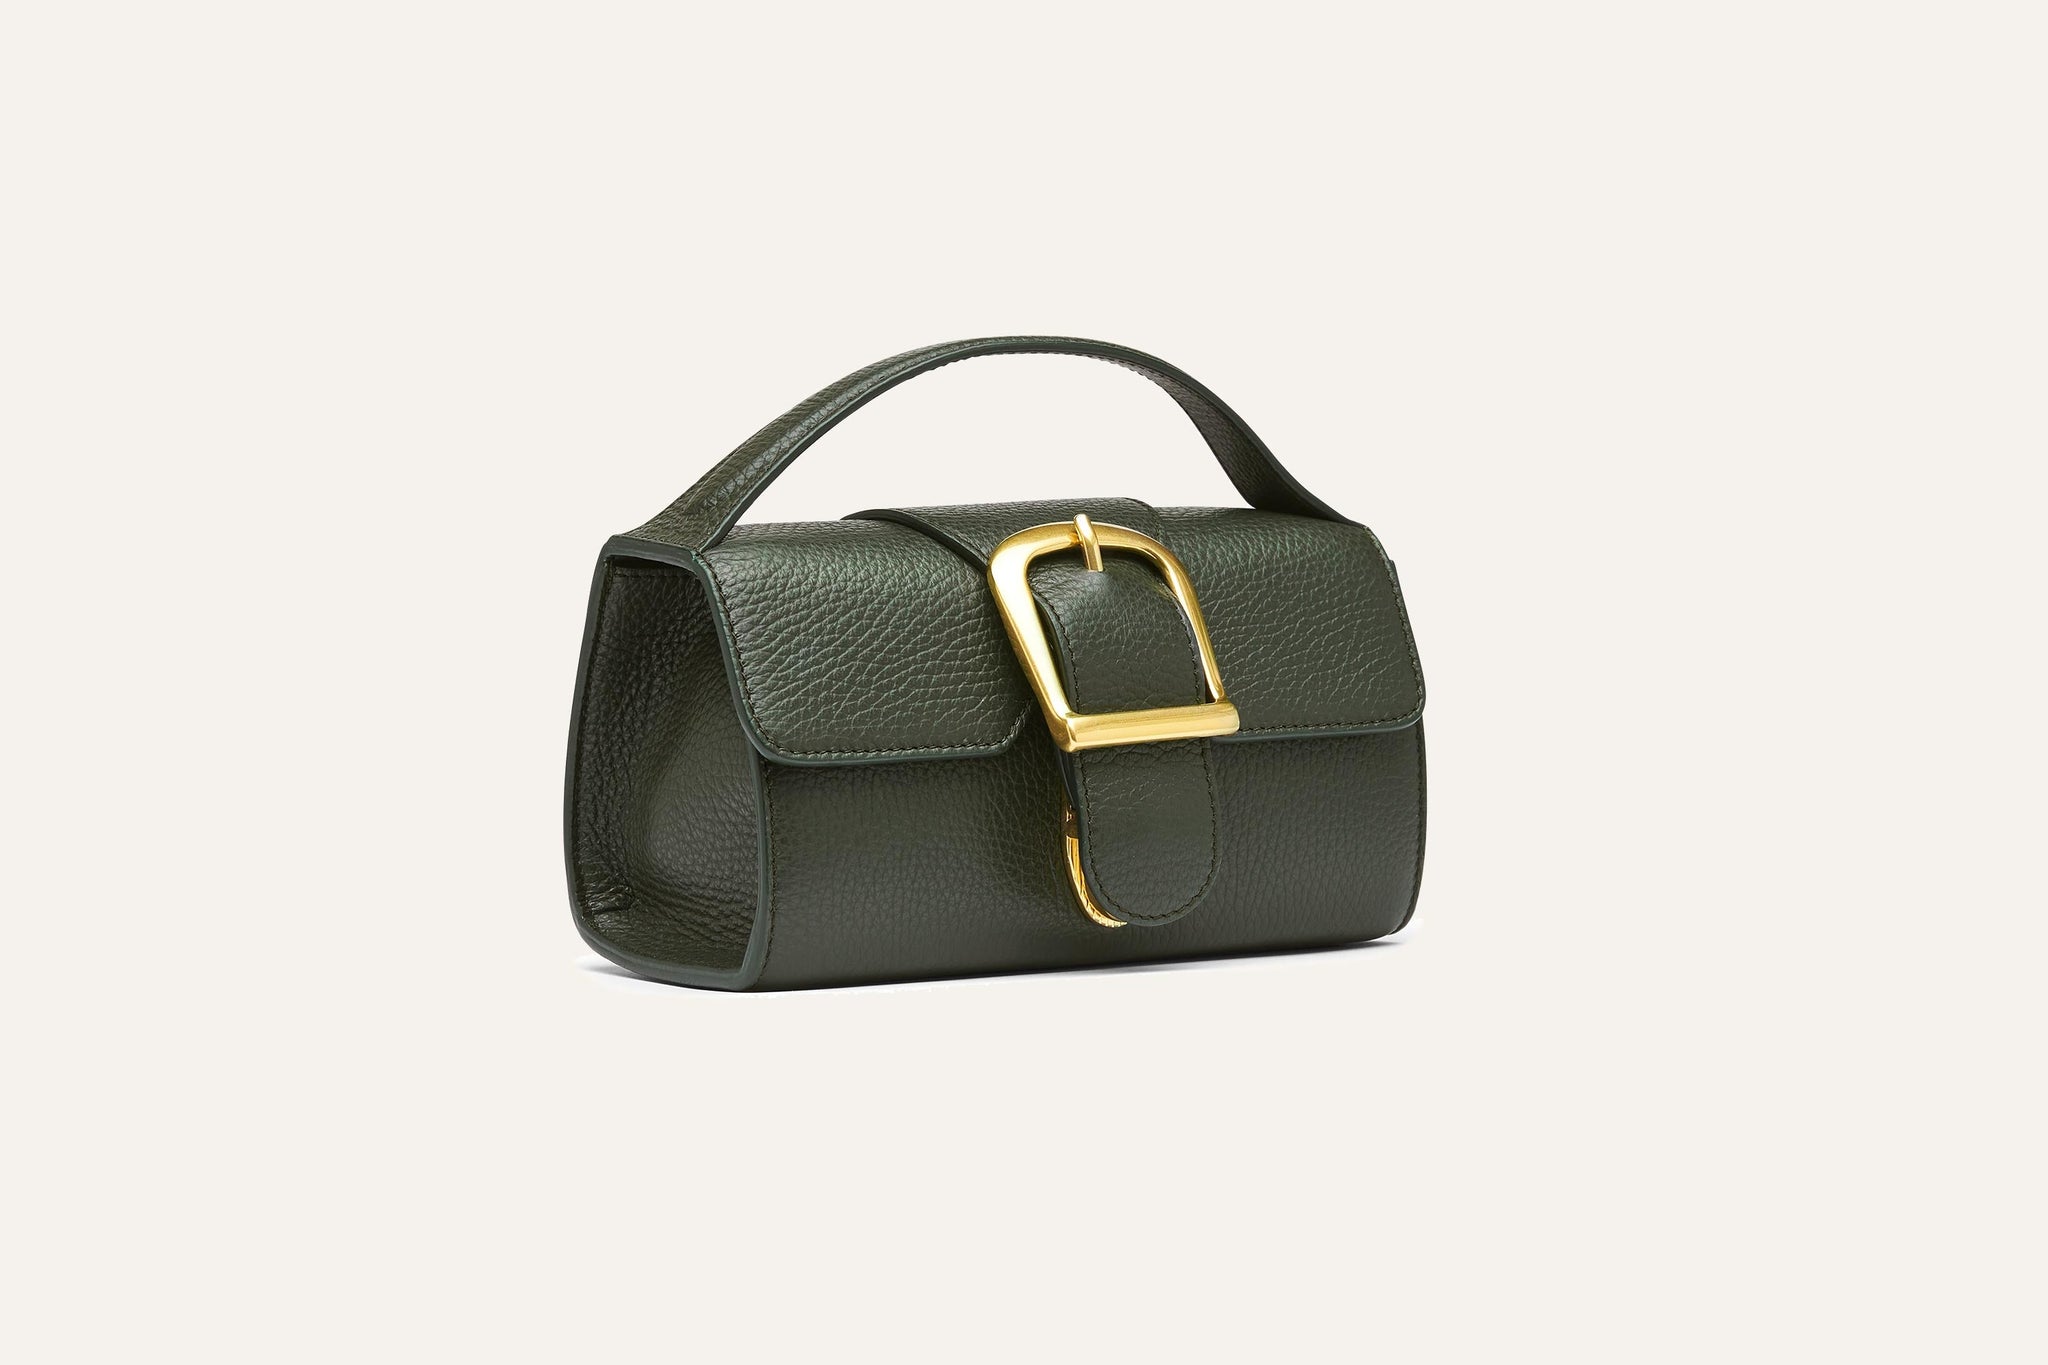 Rylan, Rylan Studio, 9.40 Forest Soft Grained Mini Satchel with Flat Handle, Made in Italy